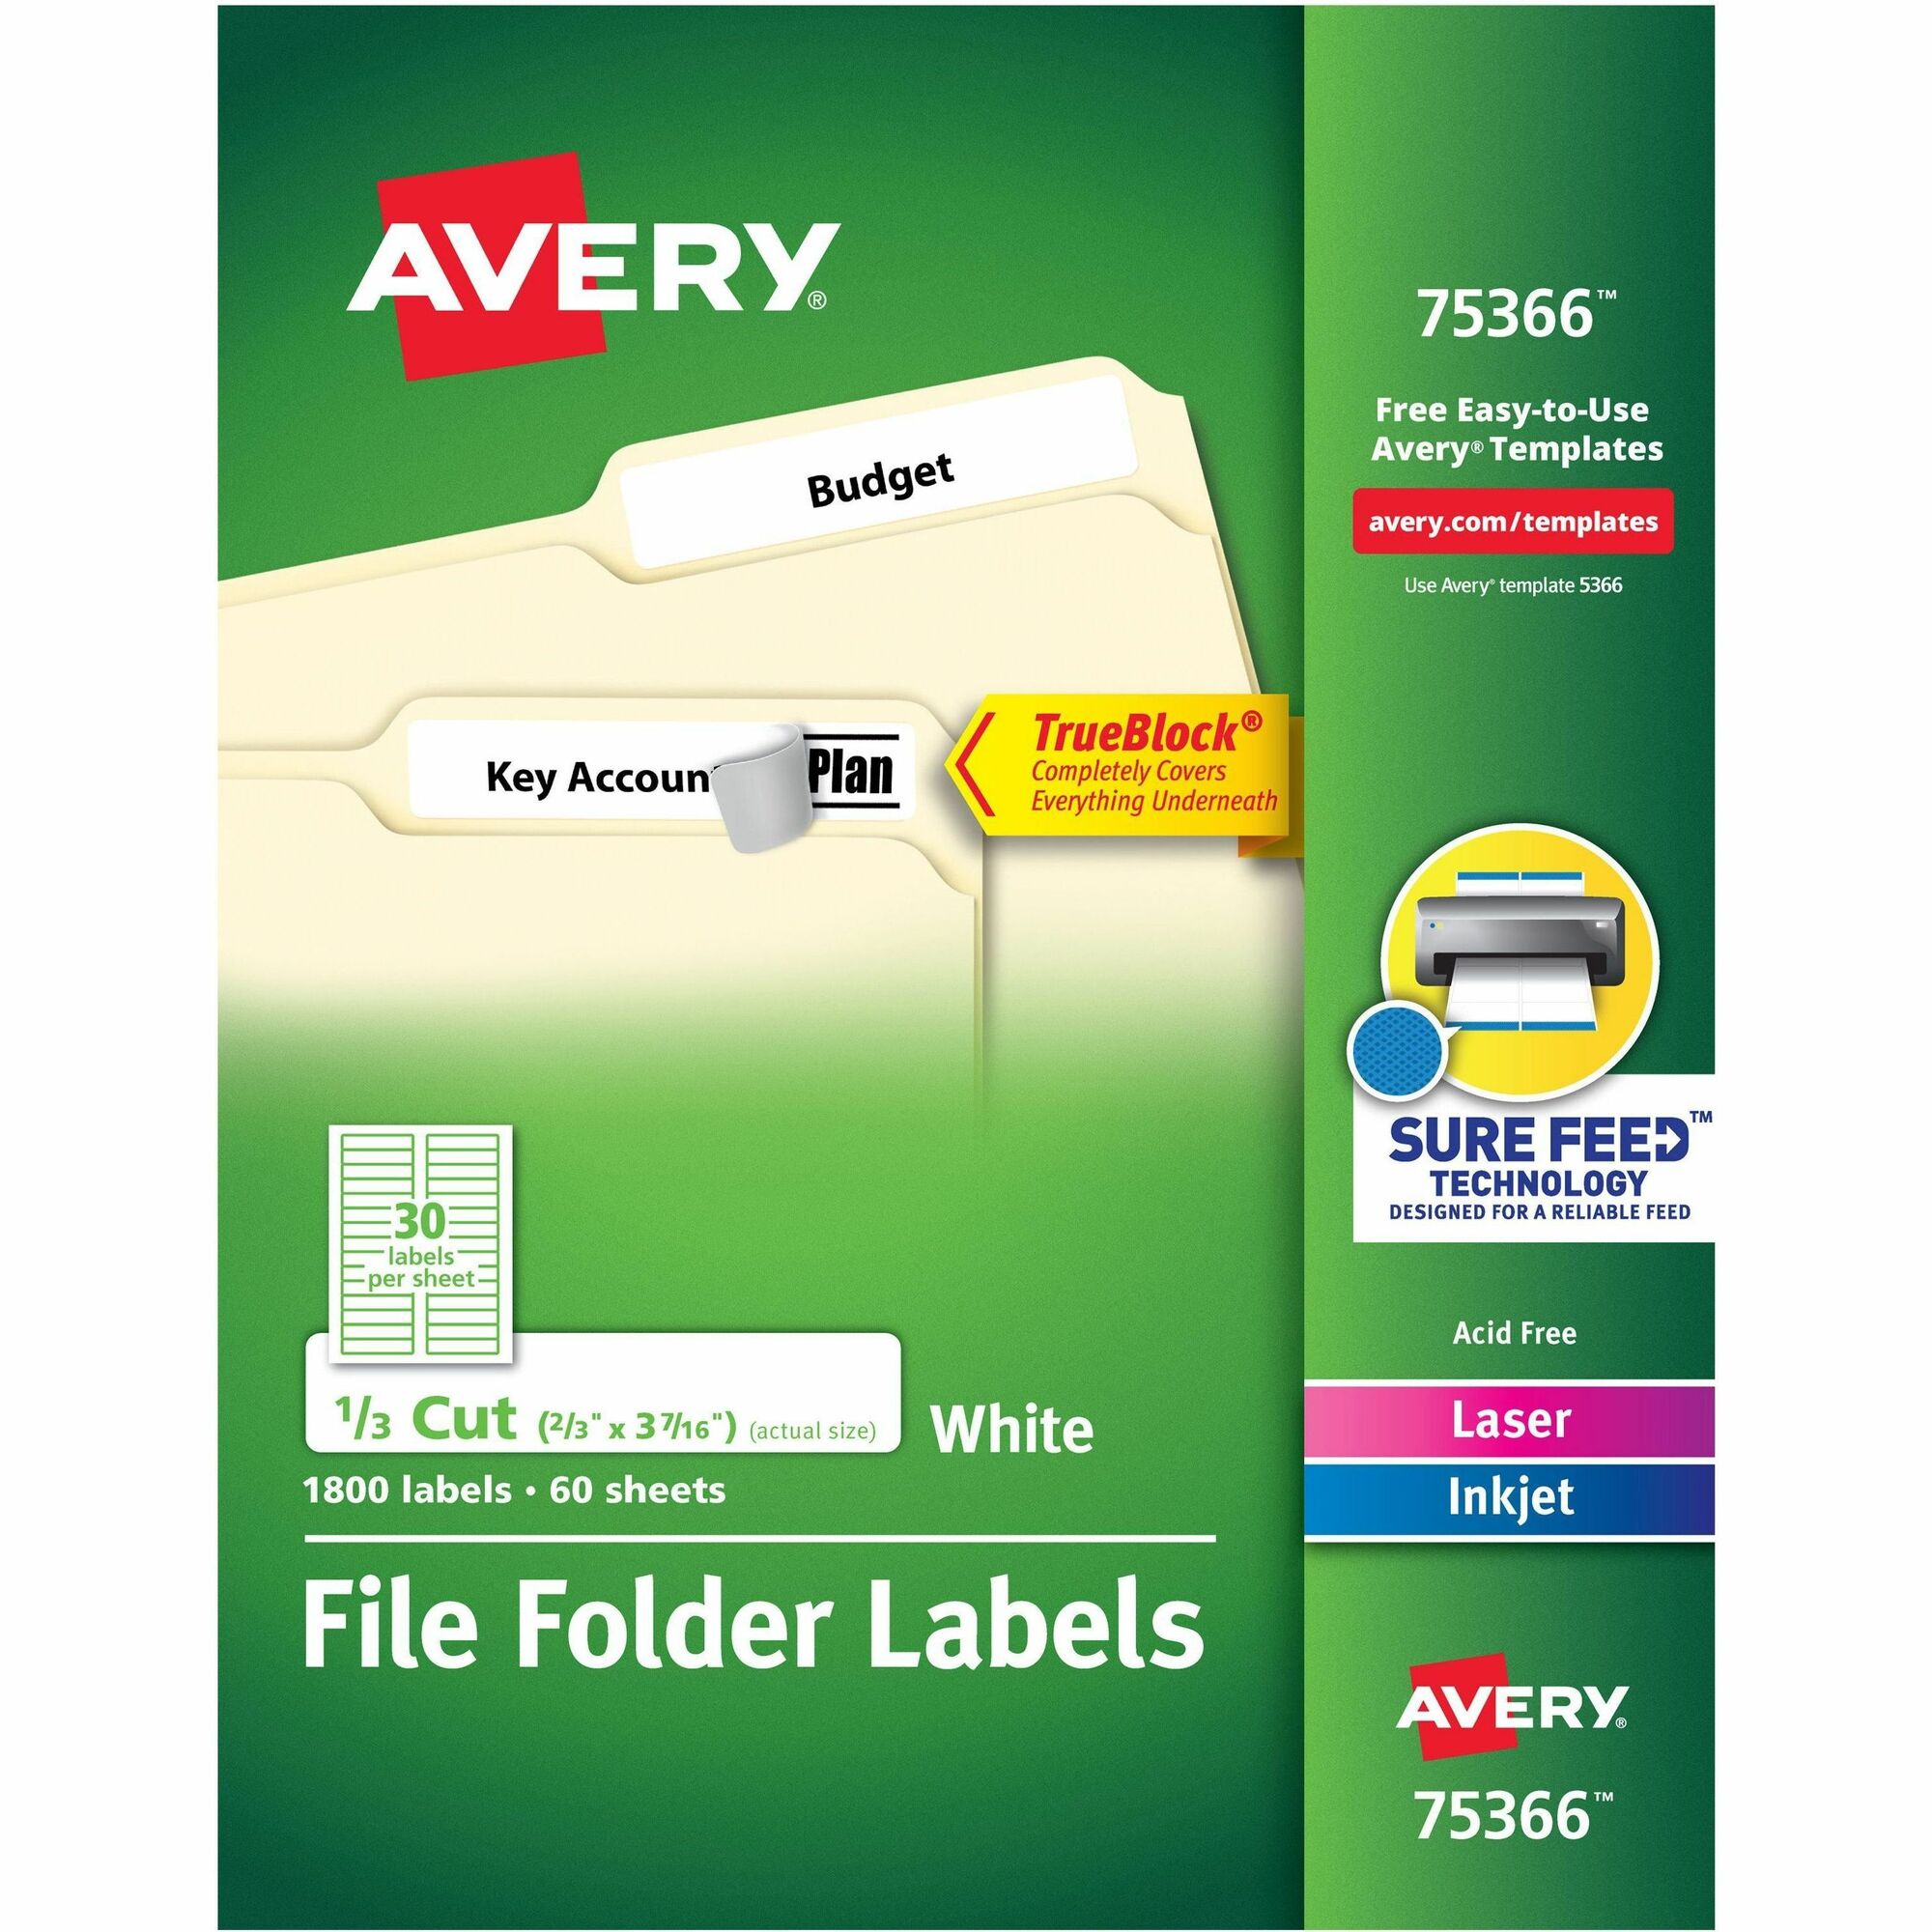 Avery 5027 Label Template TUTORE ORG Master Of Documents